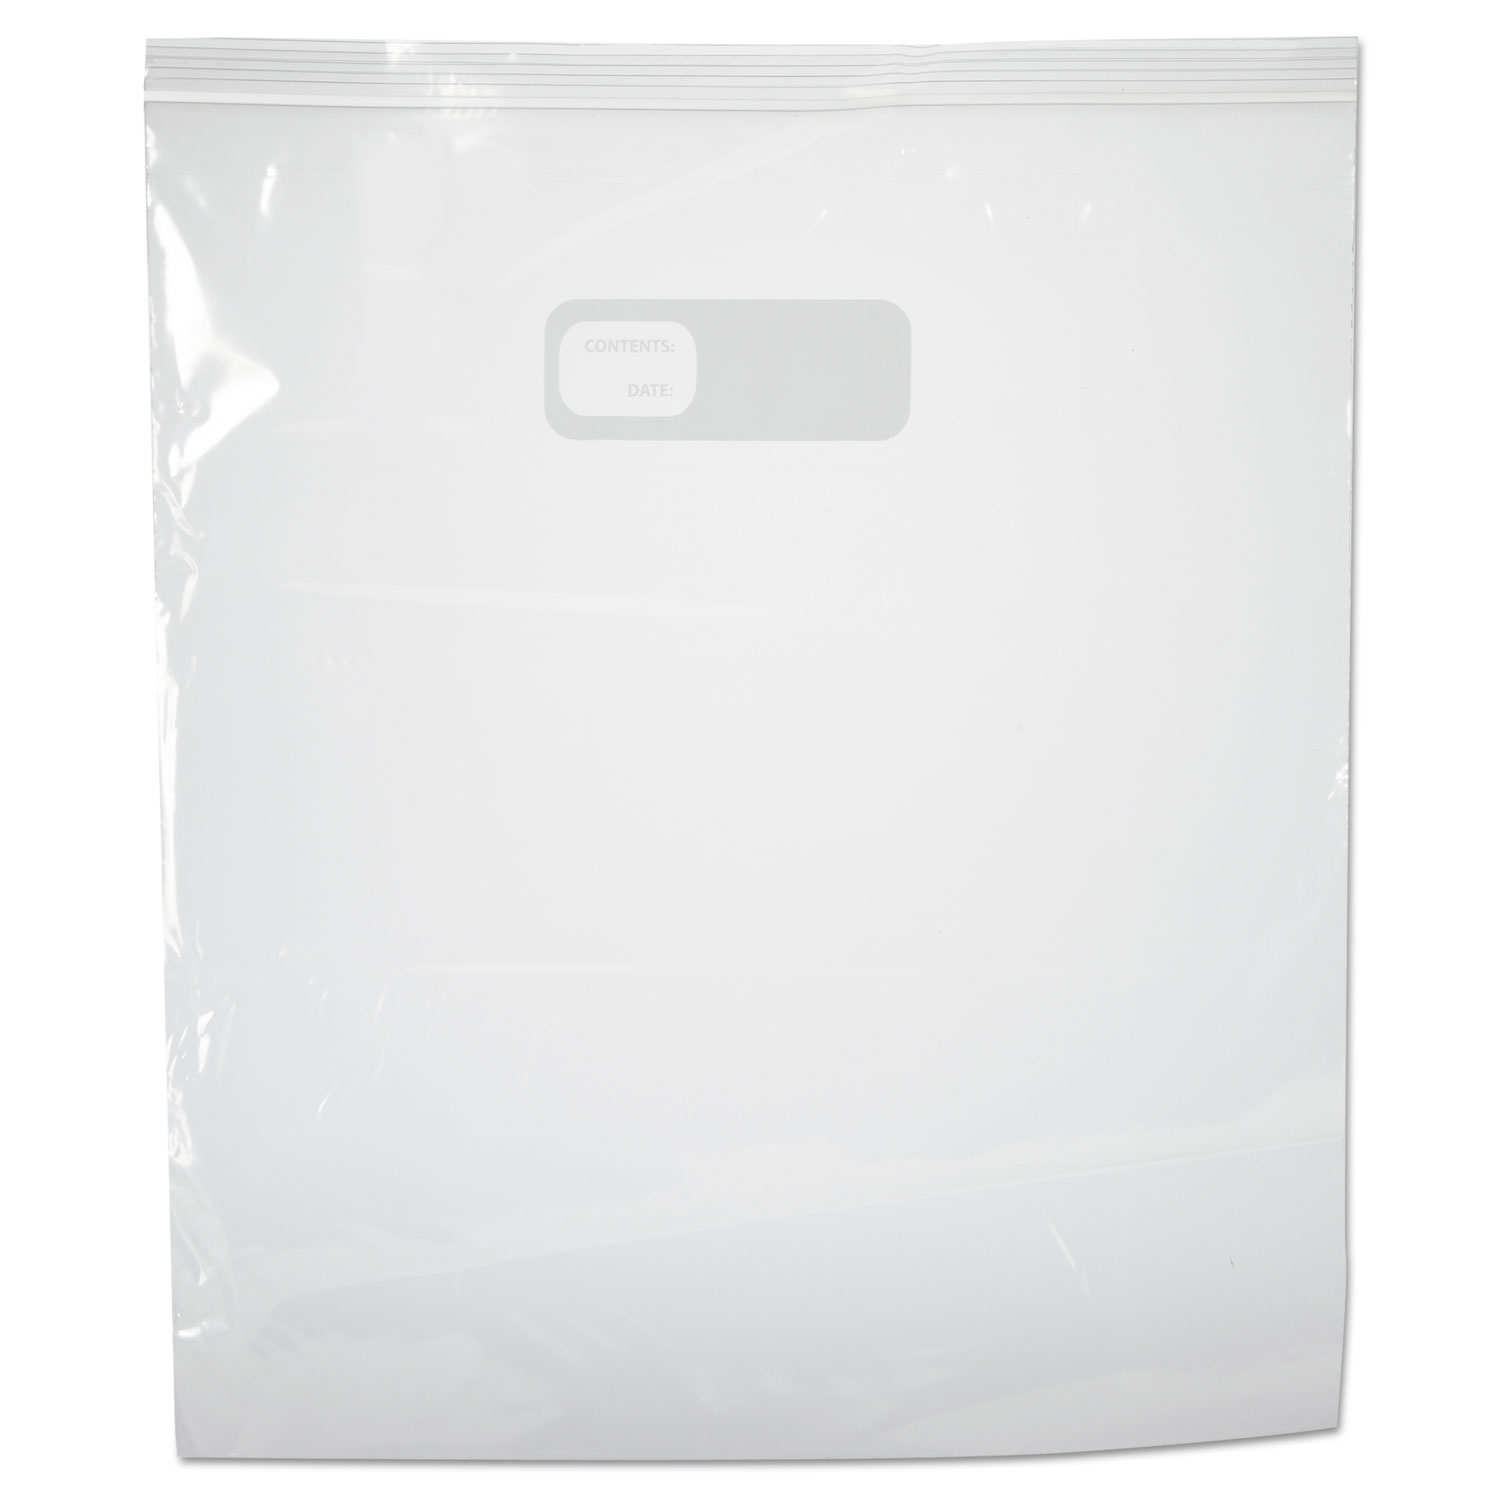 Reclosable Food Storage Bags, 2 Gal, 1.75 mil, Clear, LDPE, 13 x 15, 100/Box